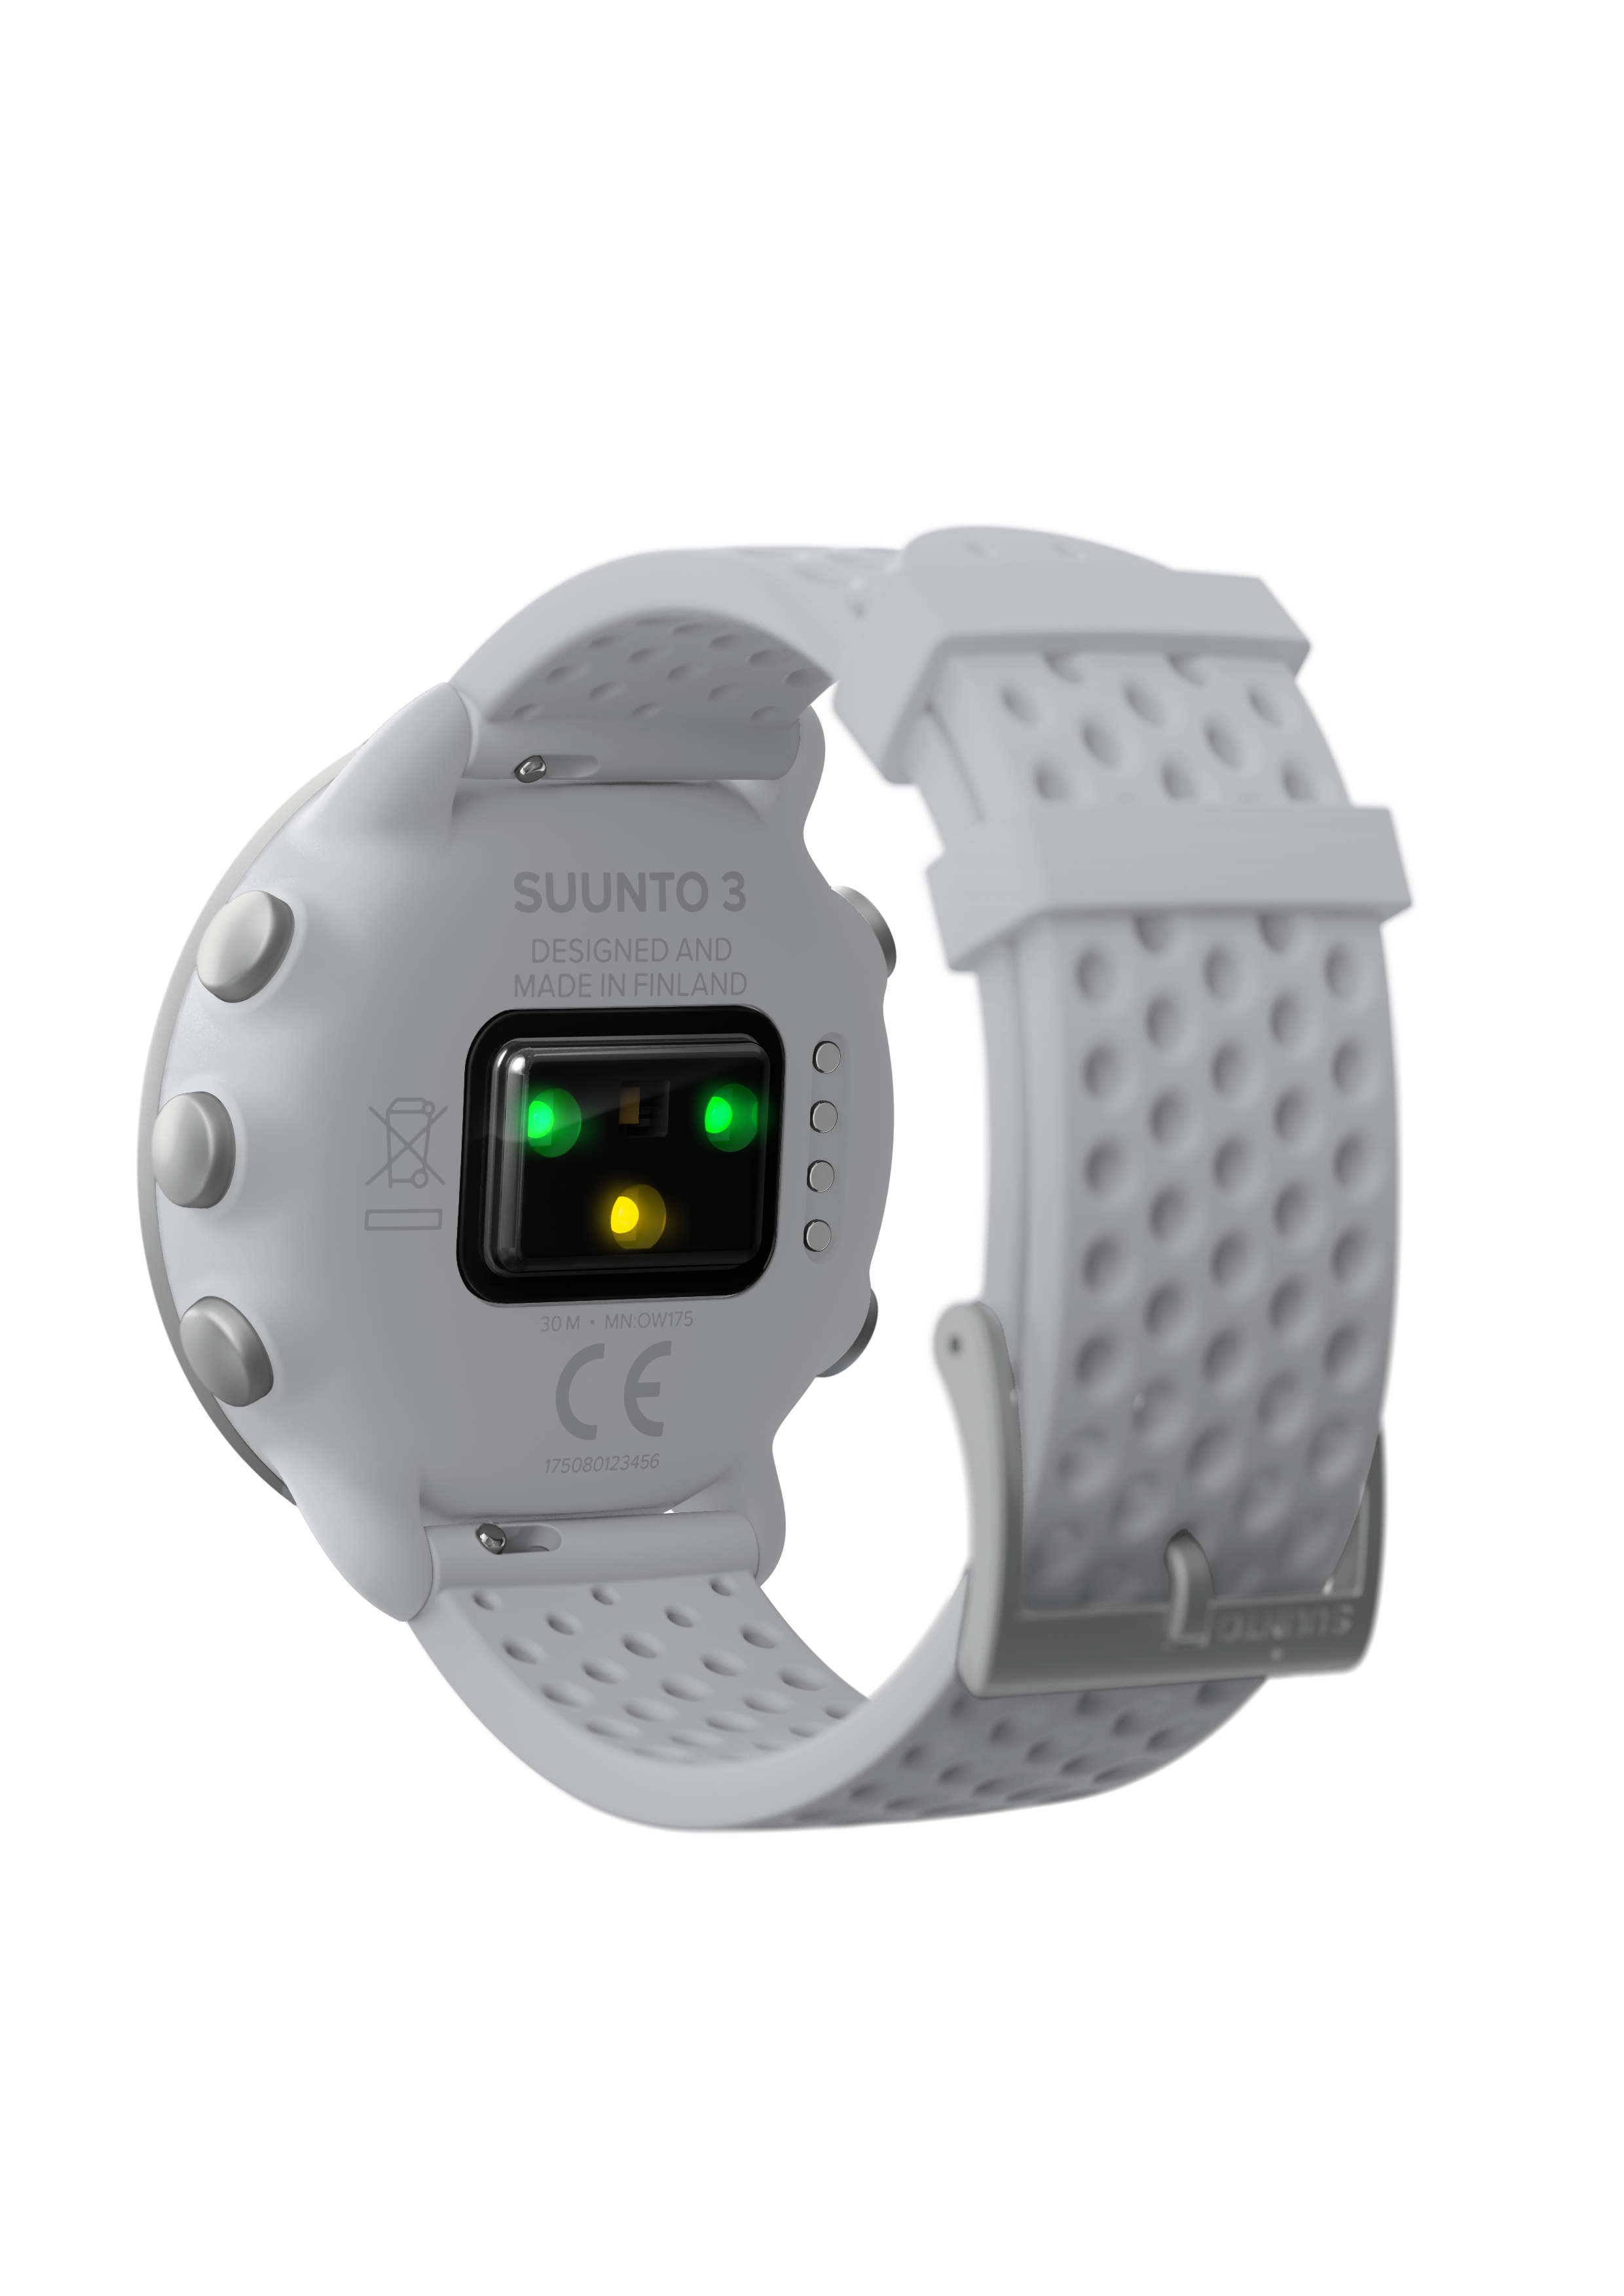 SS050416000 - SUUNTO 3 PEBBLE WHITE - Rear Perspective View.png